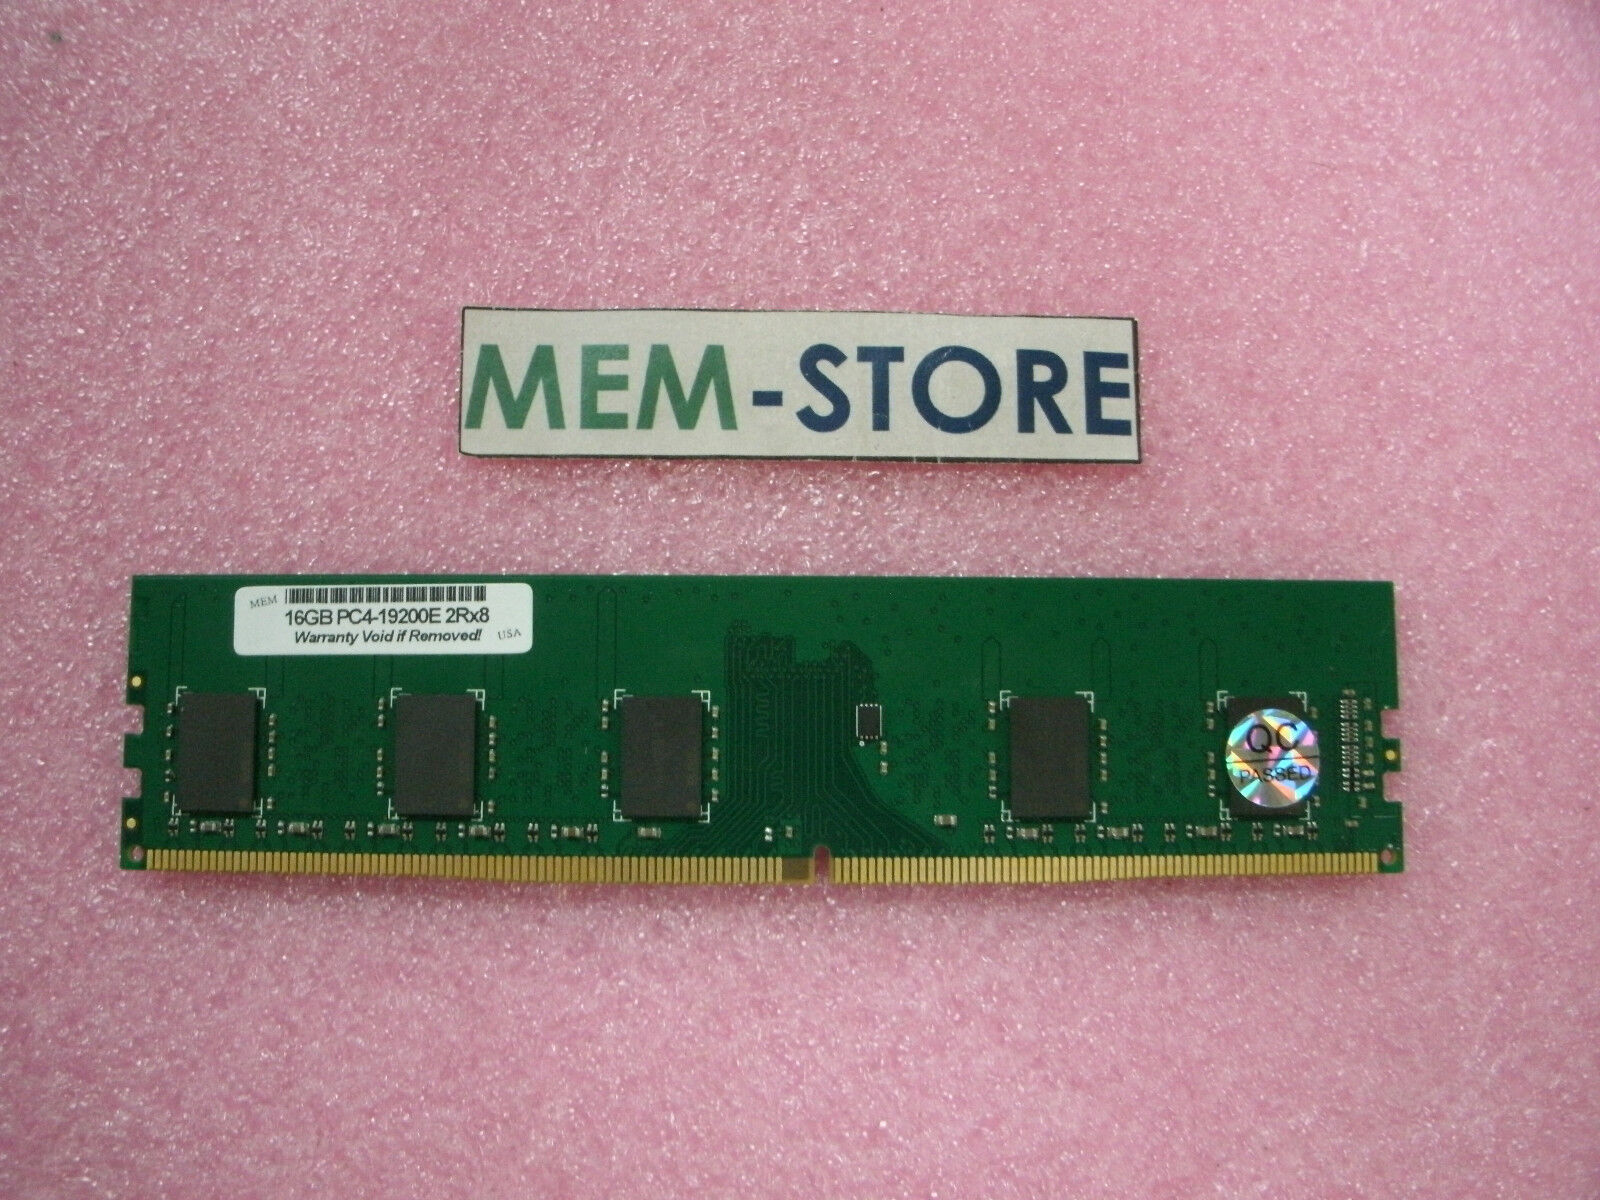 4X70G88334 Lenovo Compatible 16GB DDR4 2400MHz ECC UDIMM RAM Memory for ThinkServer RS160 (3rd Party) - image 1 of 3